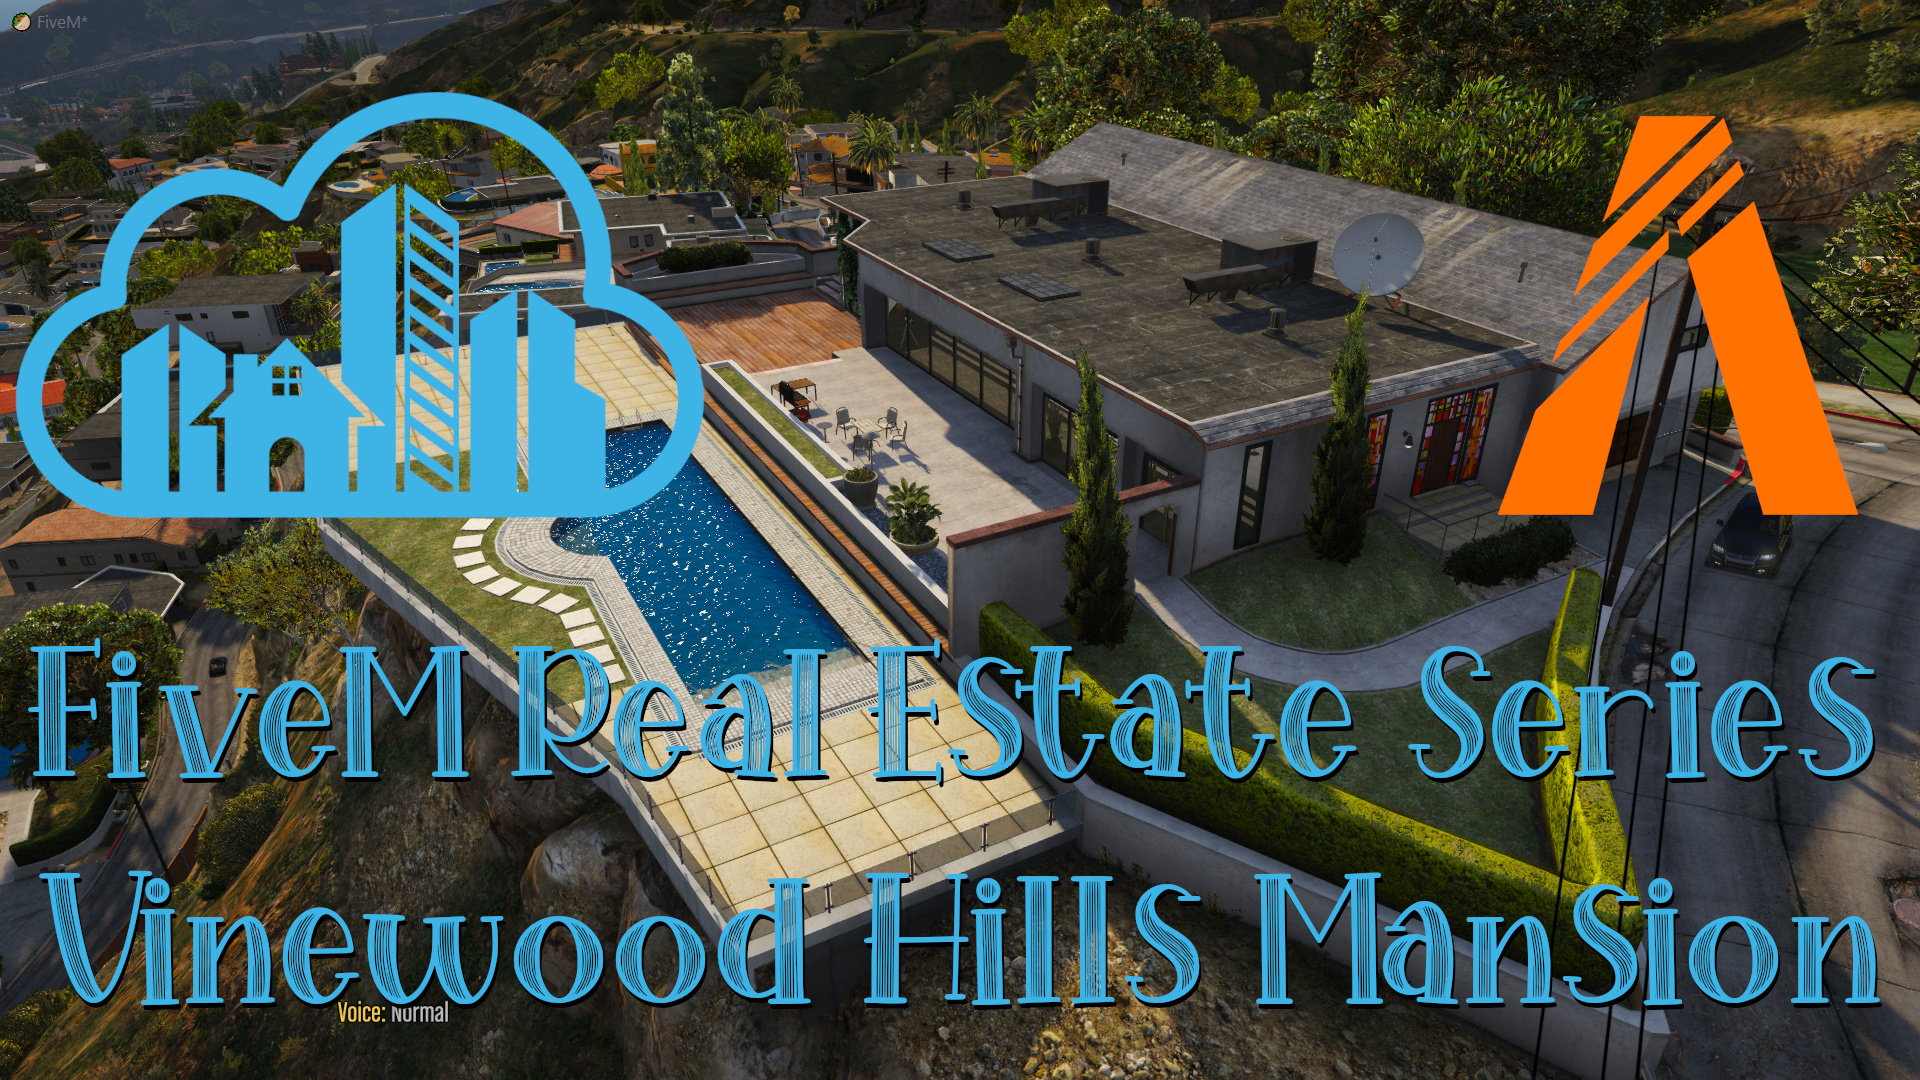 You are currently viewing FiveM Real Estate Series Vinewood Hills Mansion